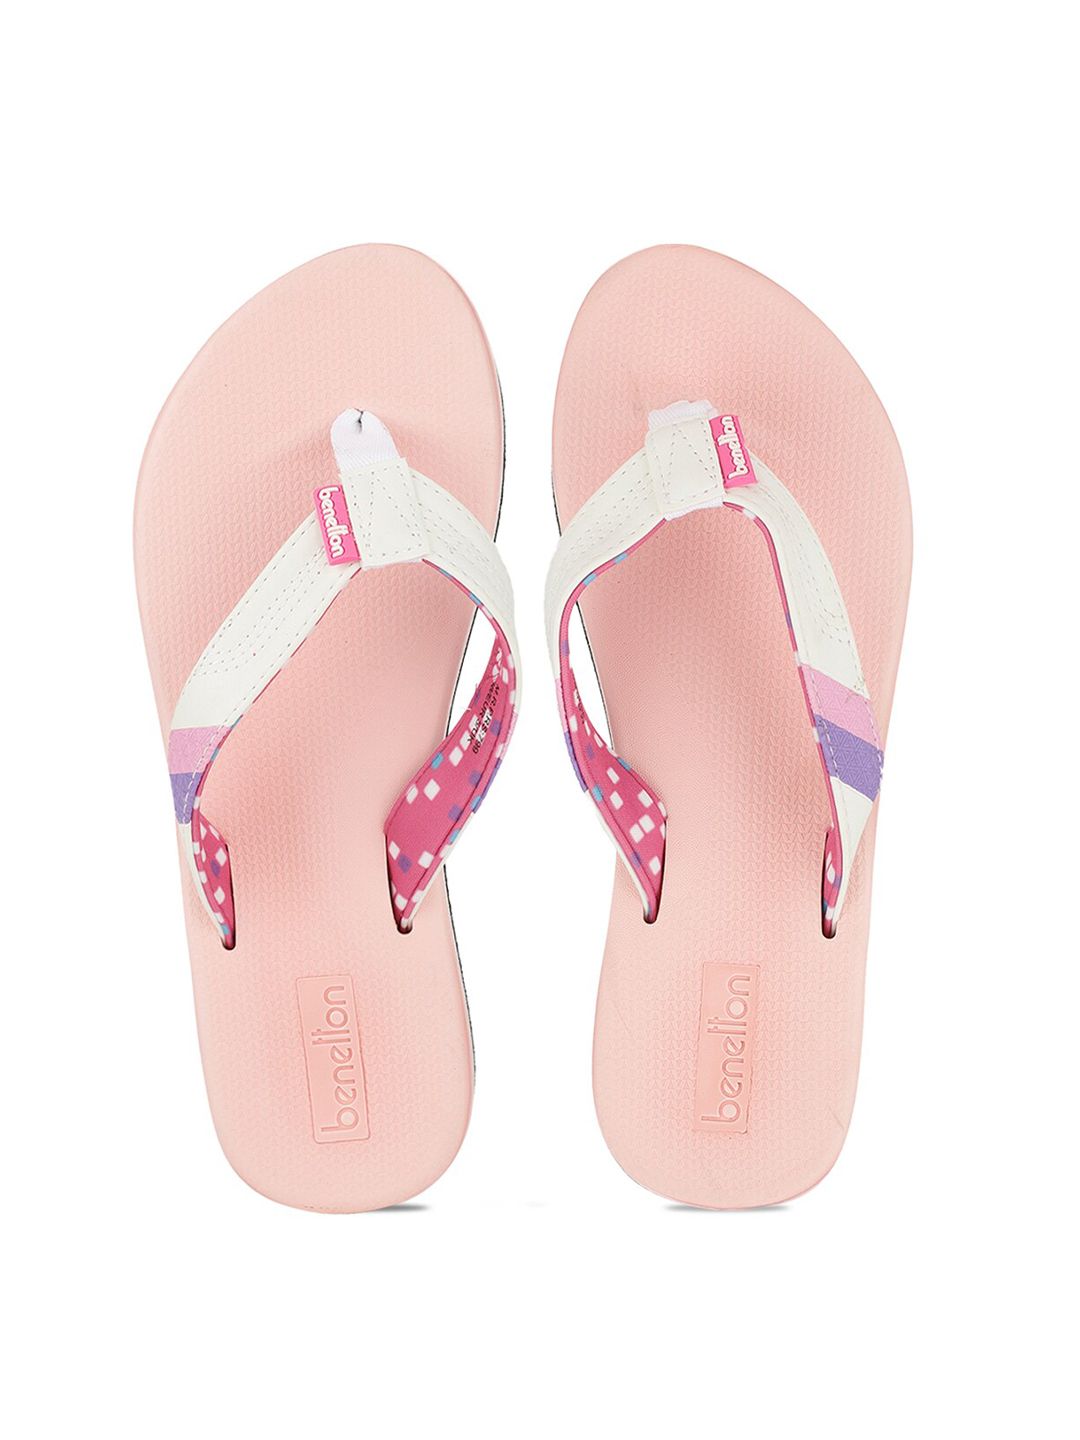 United Colors of Benetton Women White & Pink Rubber Thong Flip-Flops Price in India